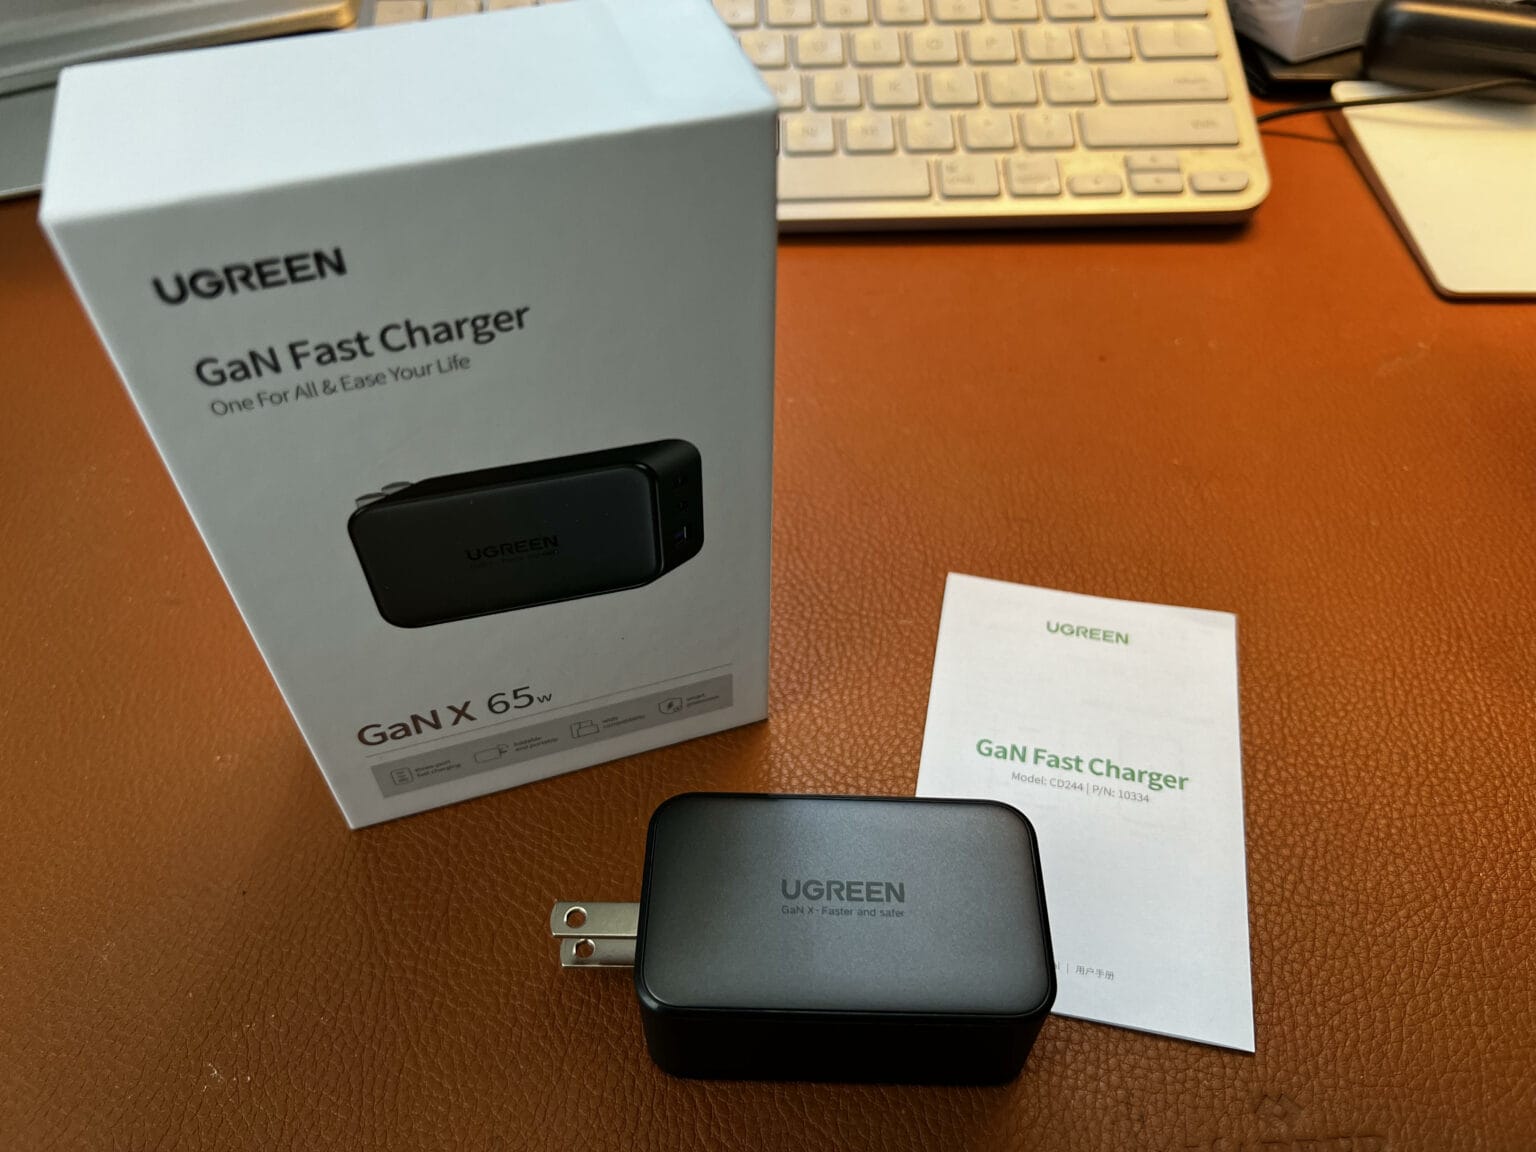 UGreen's 65W GaN charger can top off three devices at once.